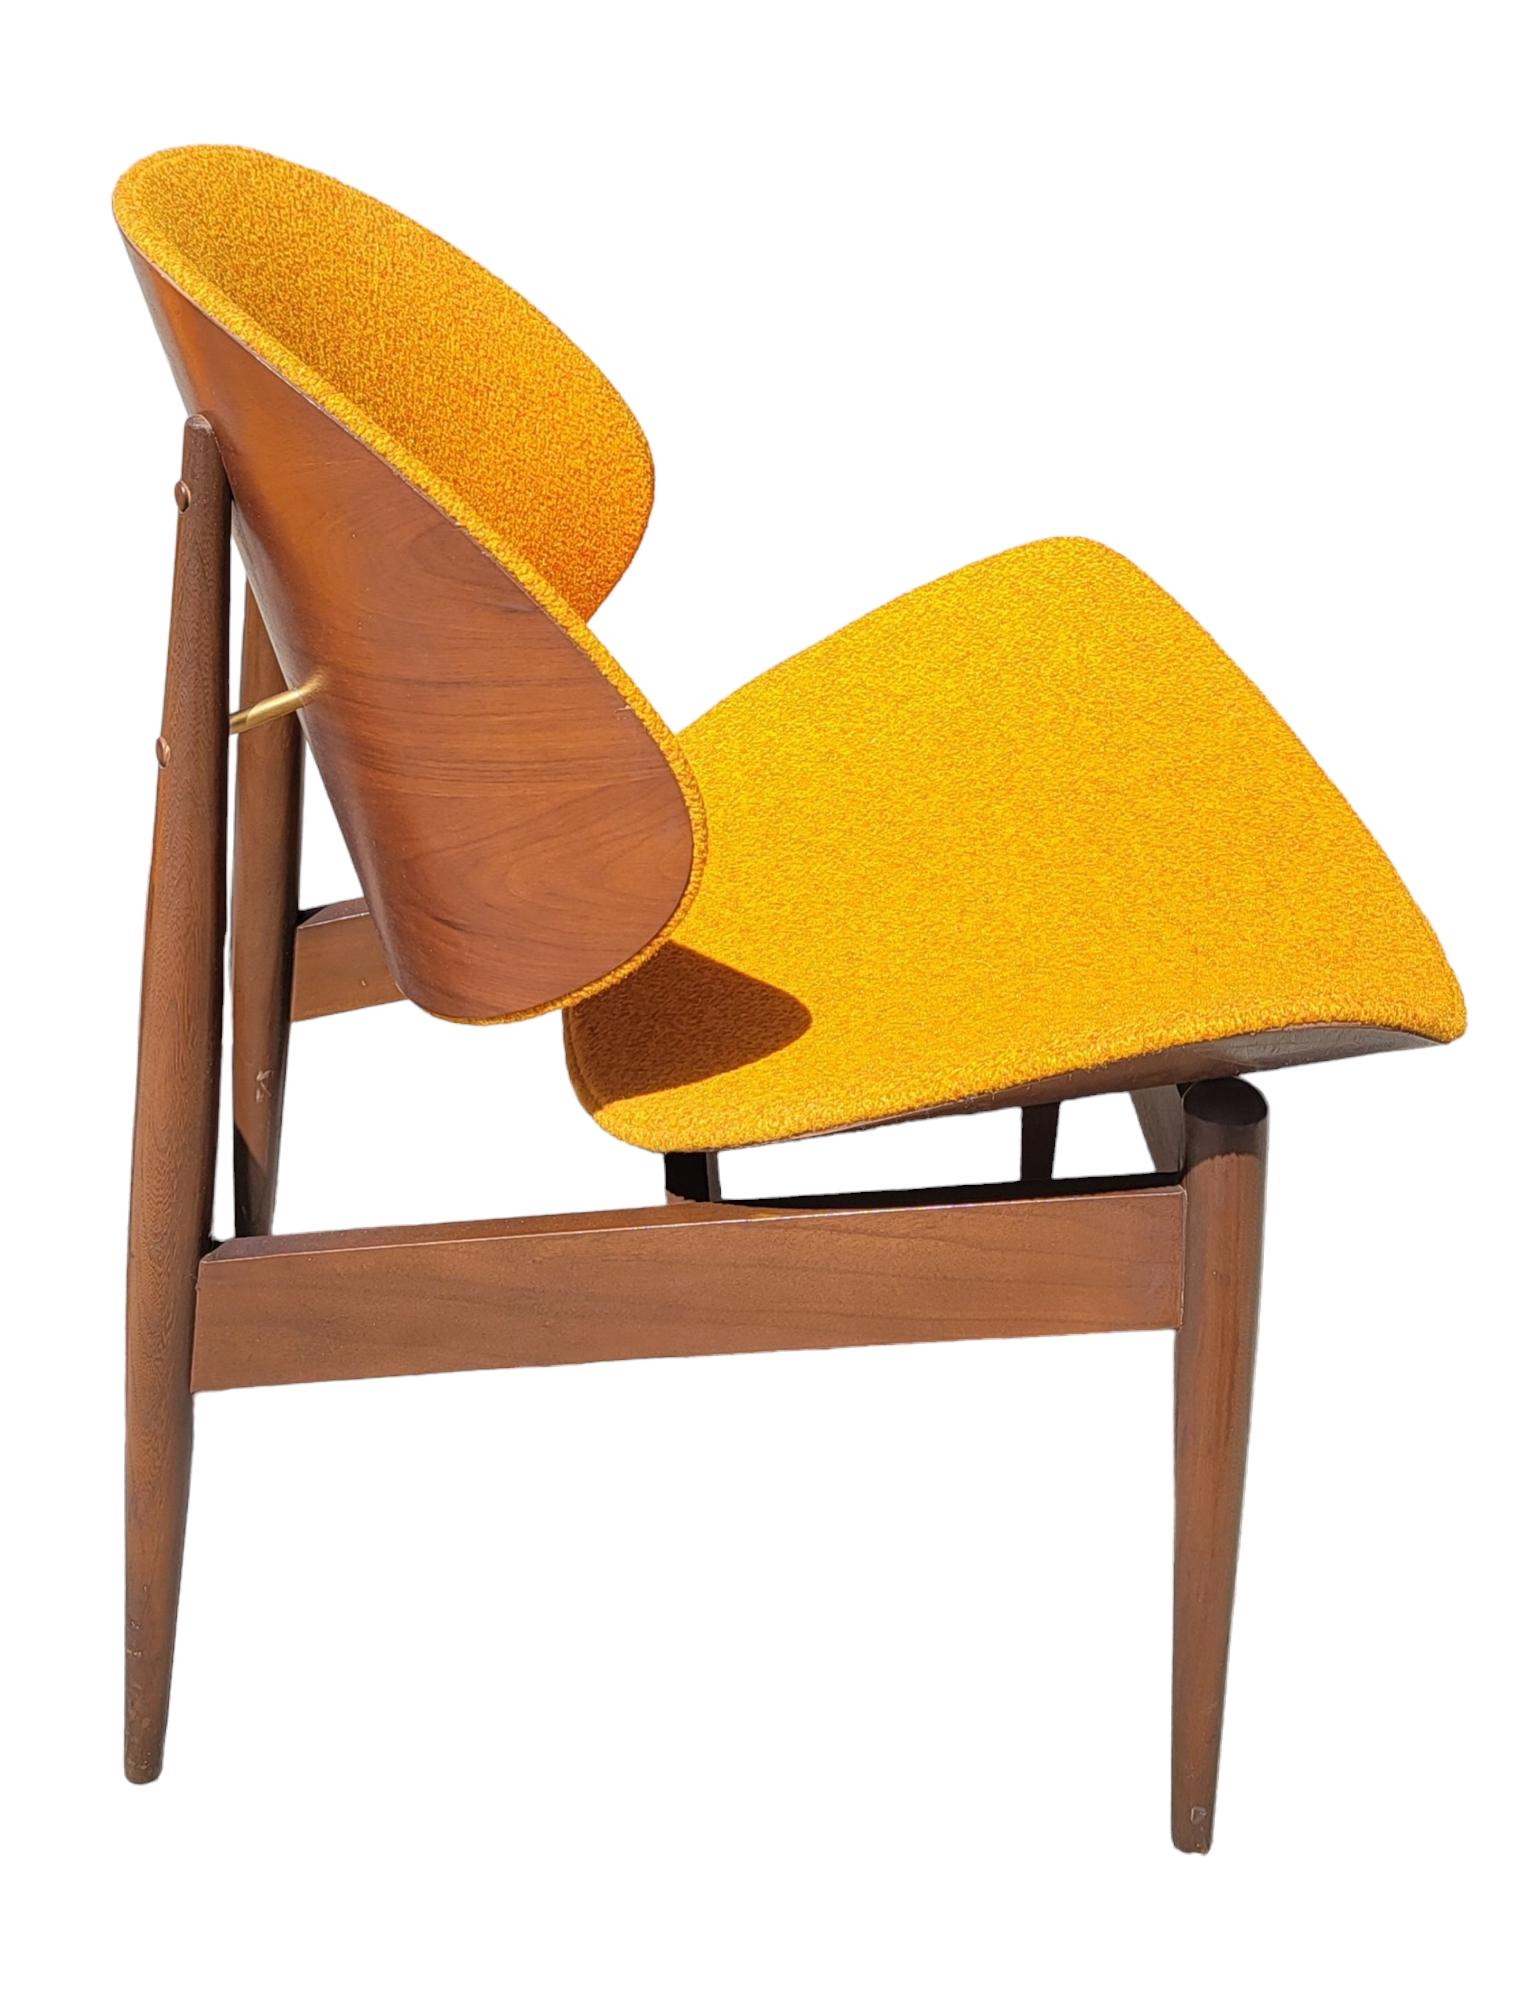 Vintage Mid Century Seymour James Weiner Kodawood Oyster Chair In Good Condition In Pasadena, CA